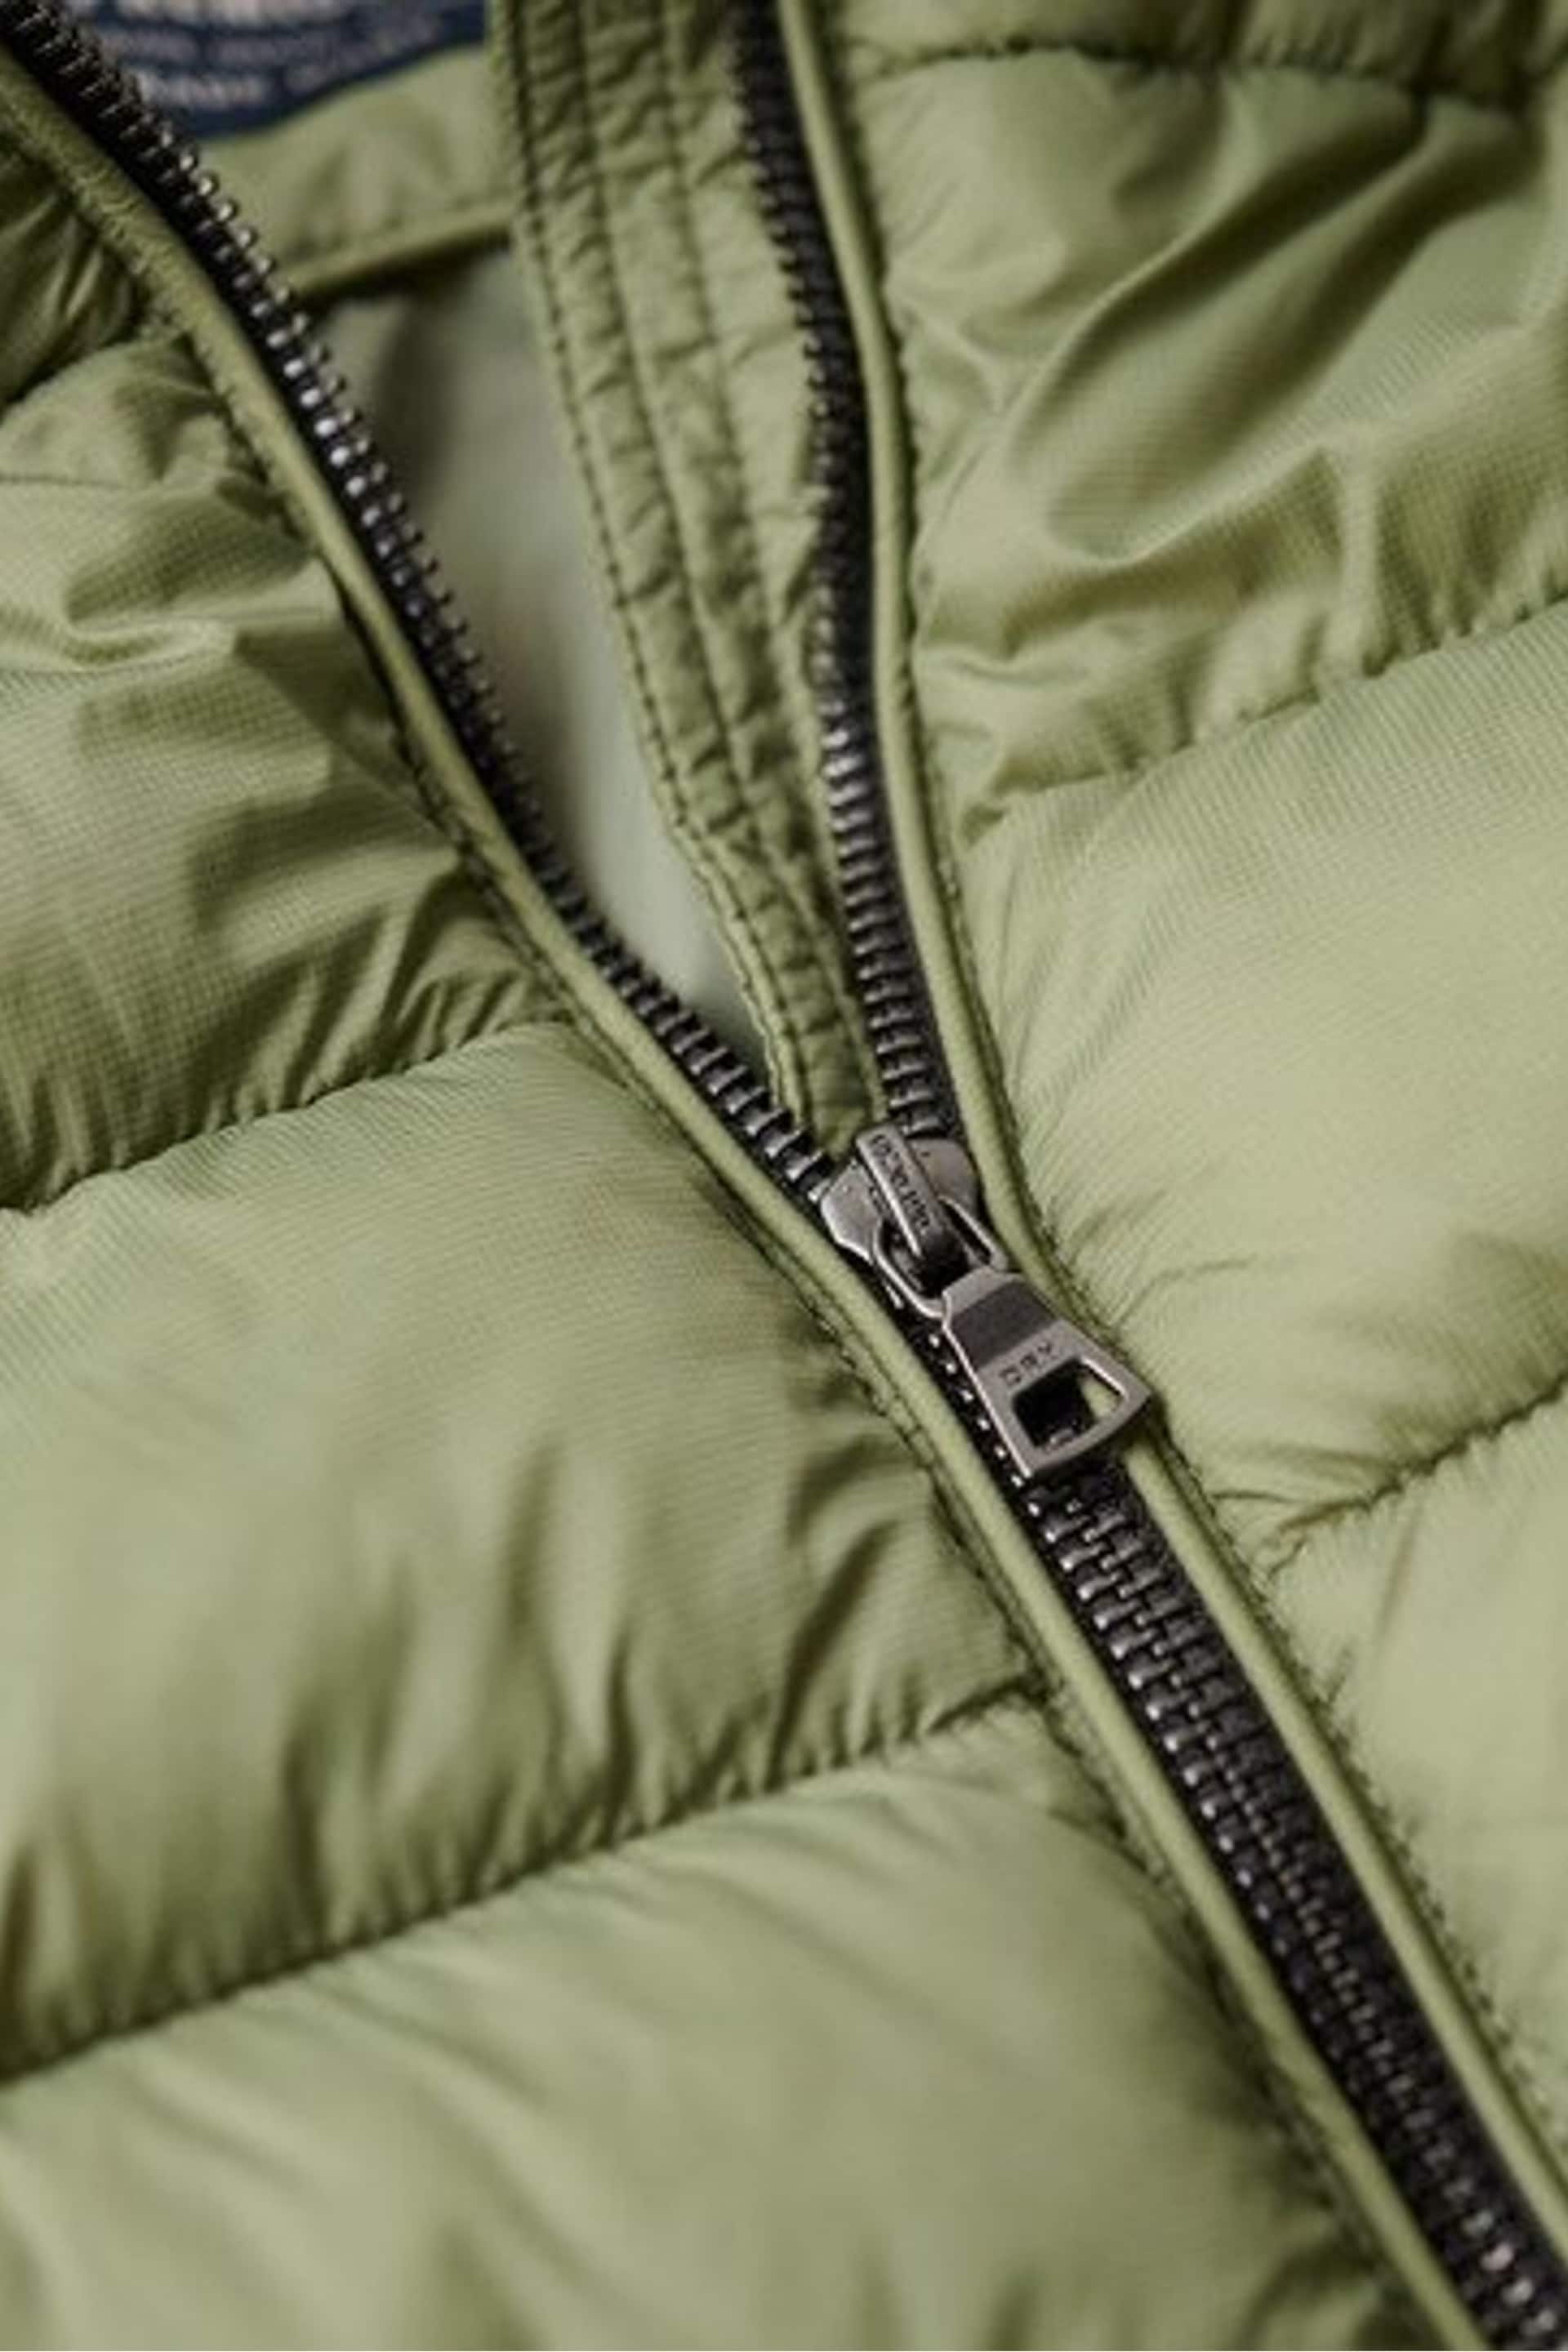 Superdry Green Lightweight Padded Jacket - Image 5 of 6